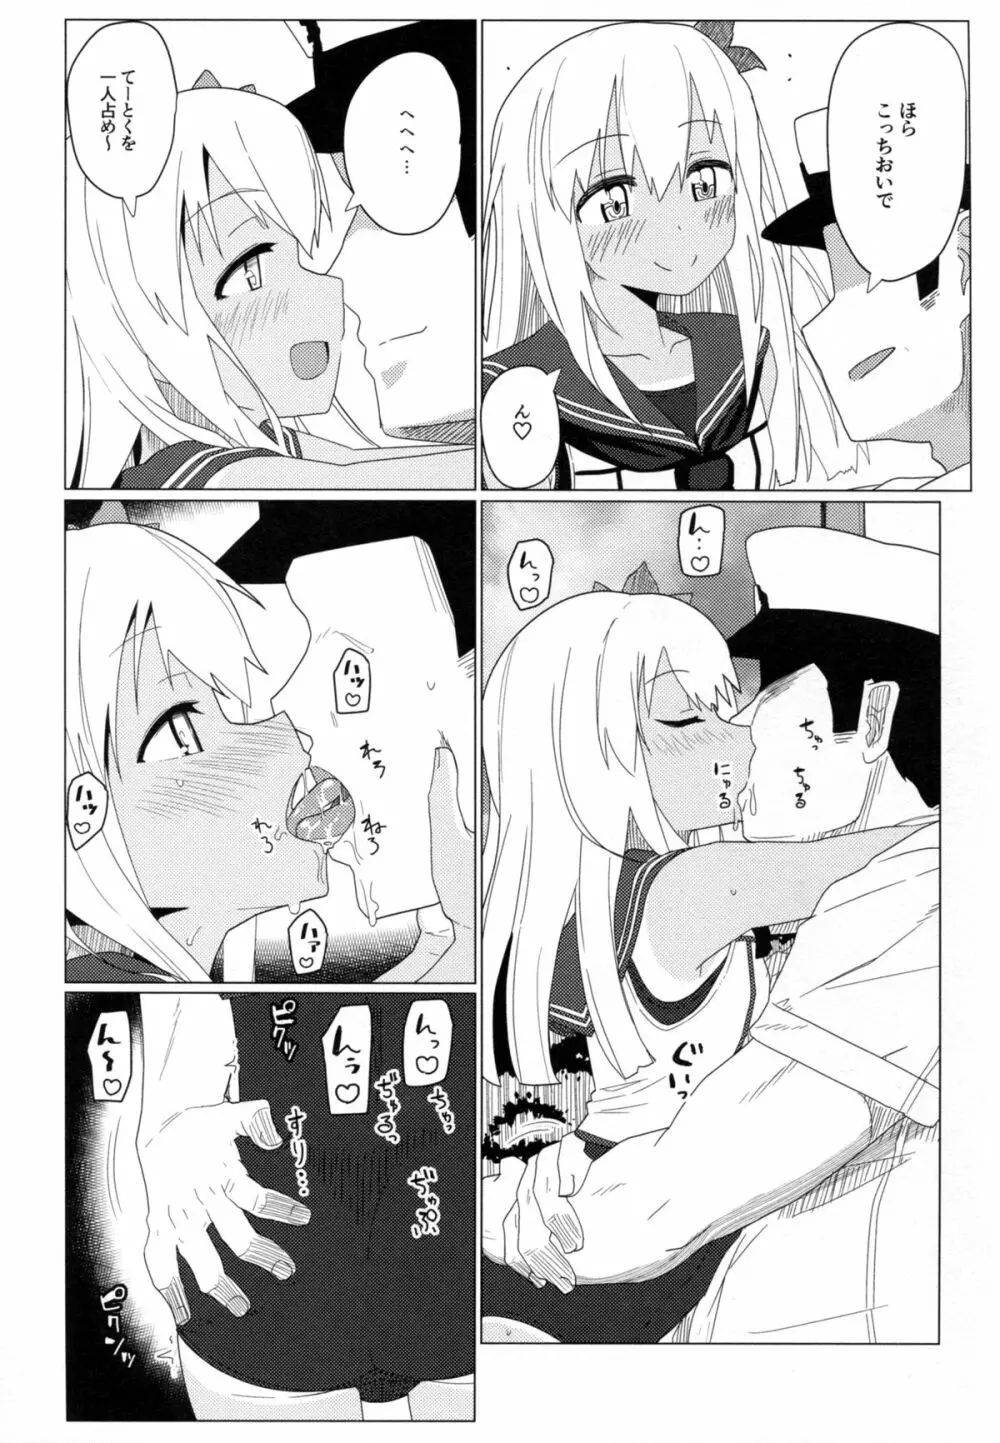 GIRLFriend's 9 Page.7